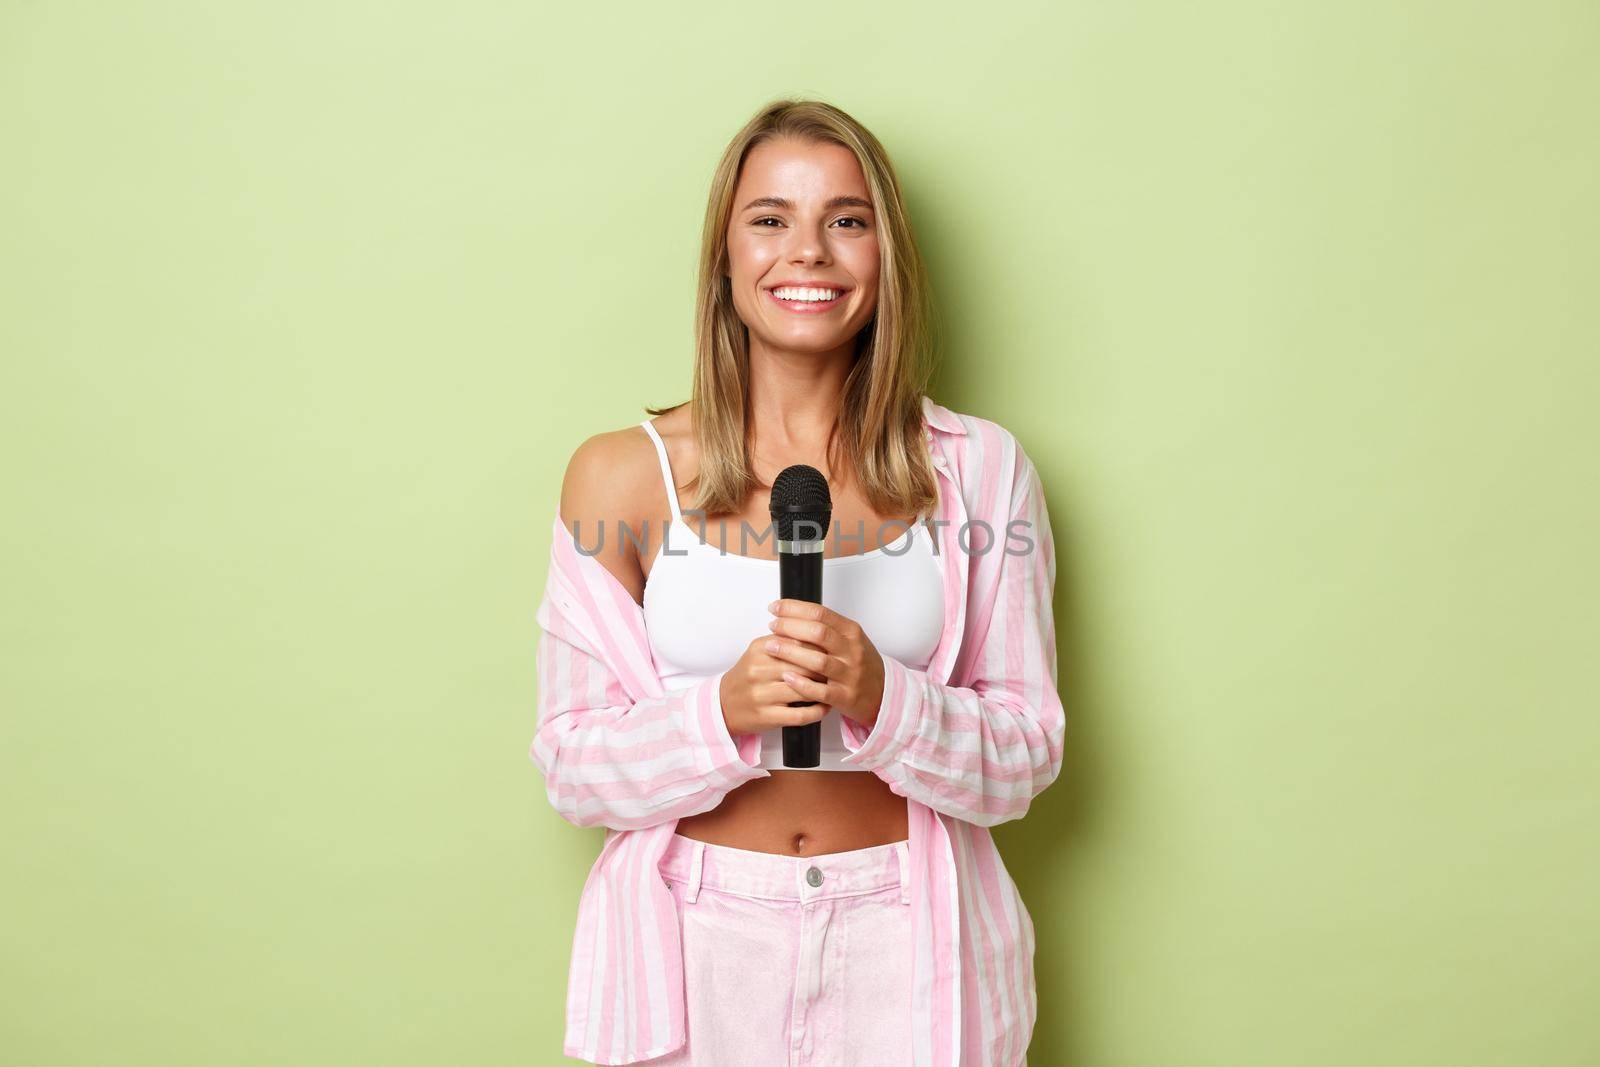 Portrait of attractive stylish woman with short blond hair, singing karaoke, holding microphone and smiling, standing over green background.